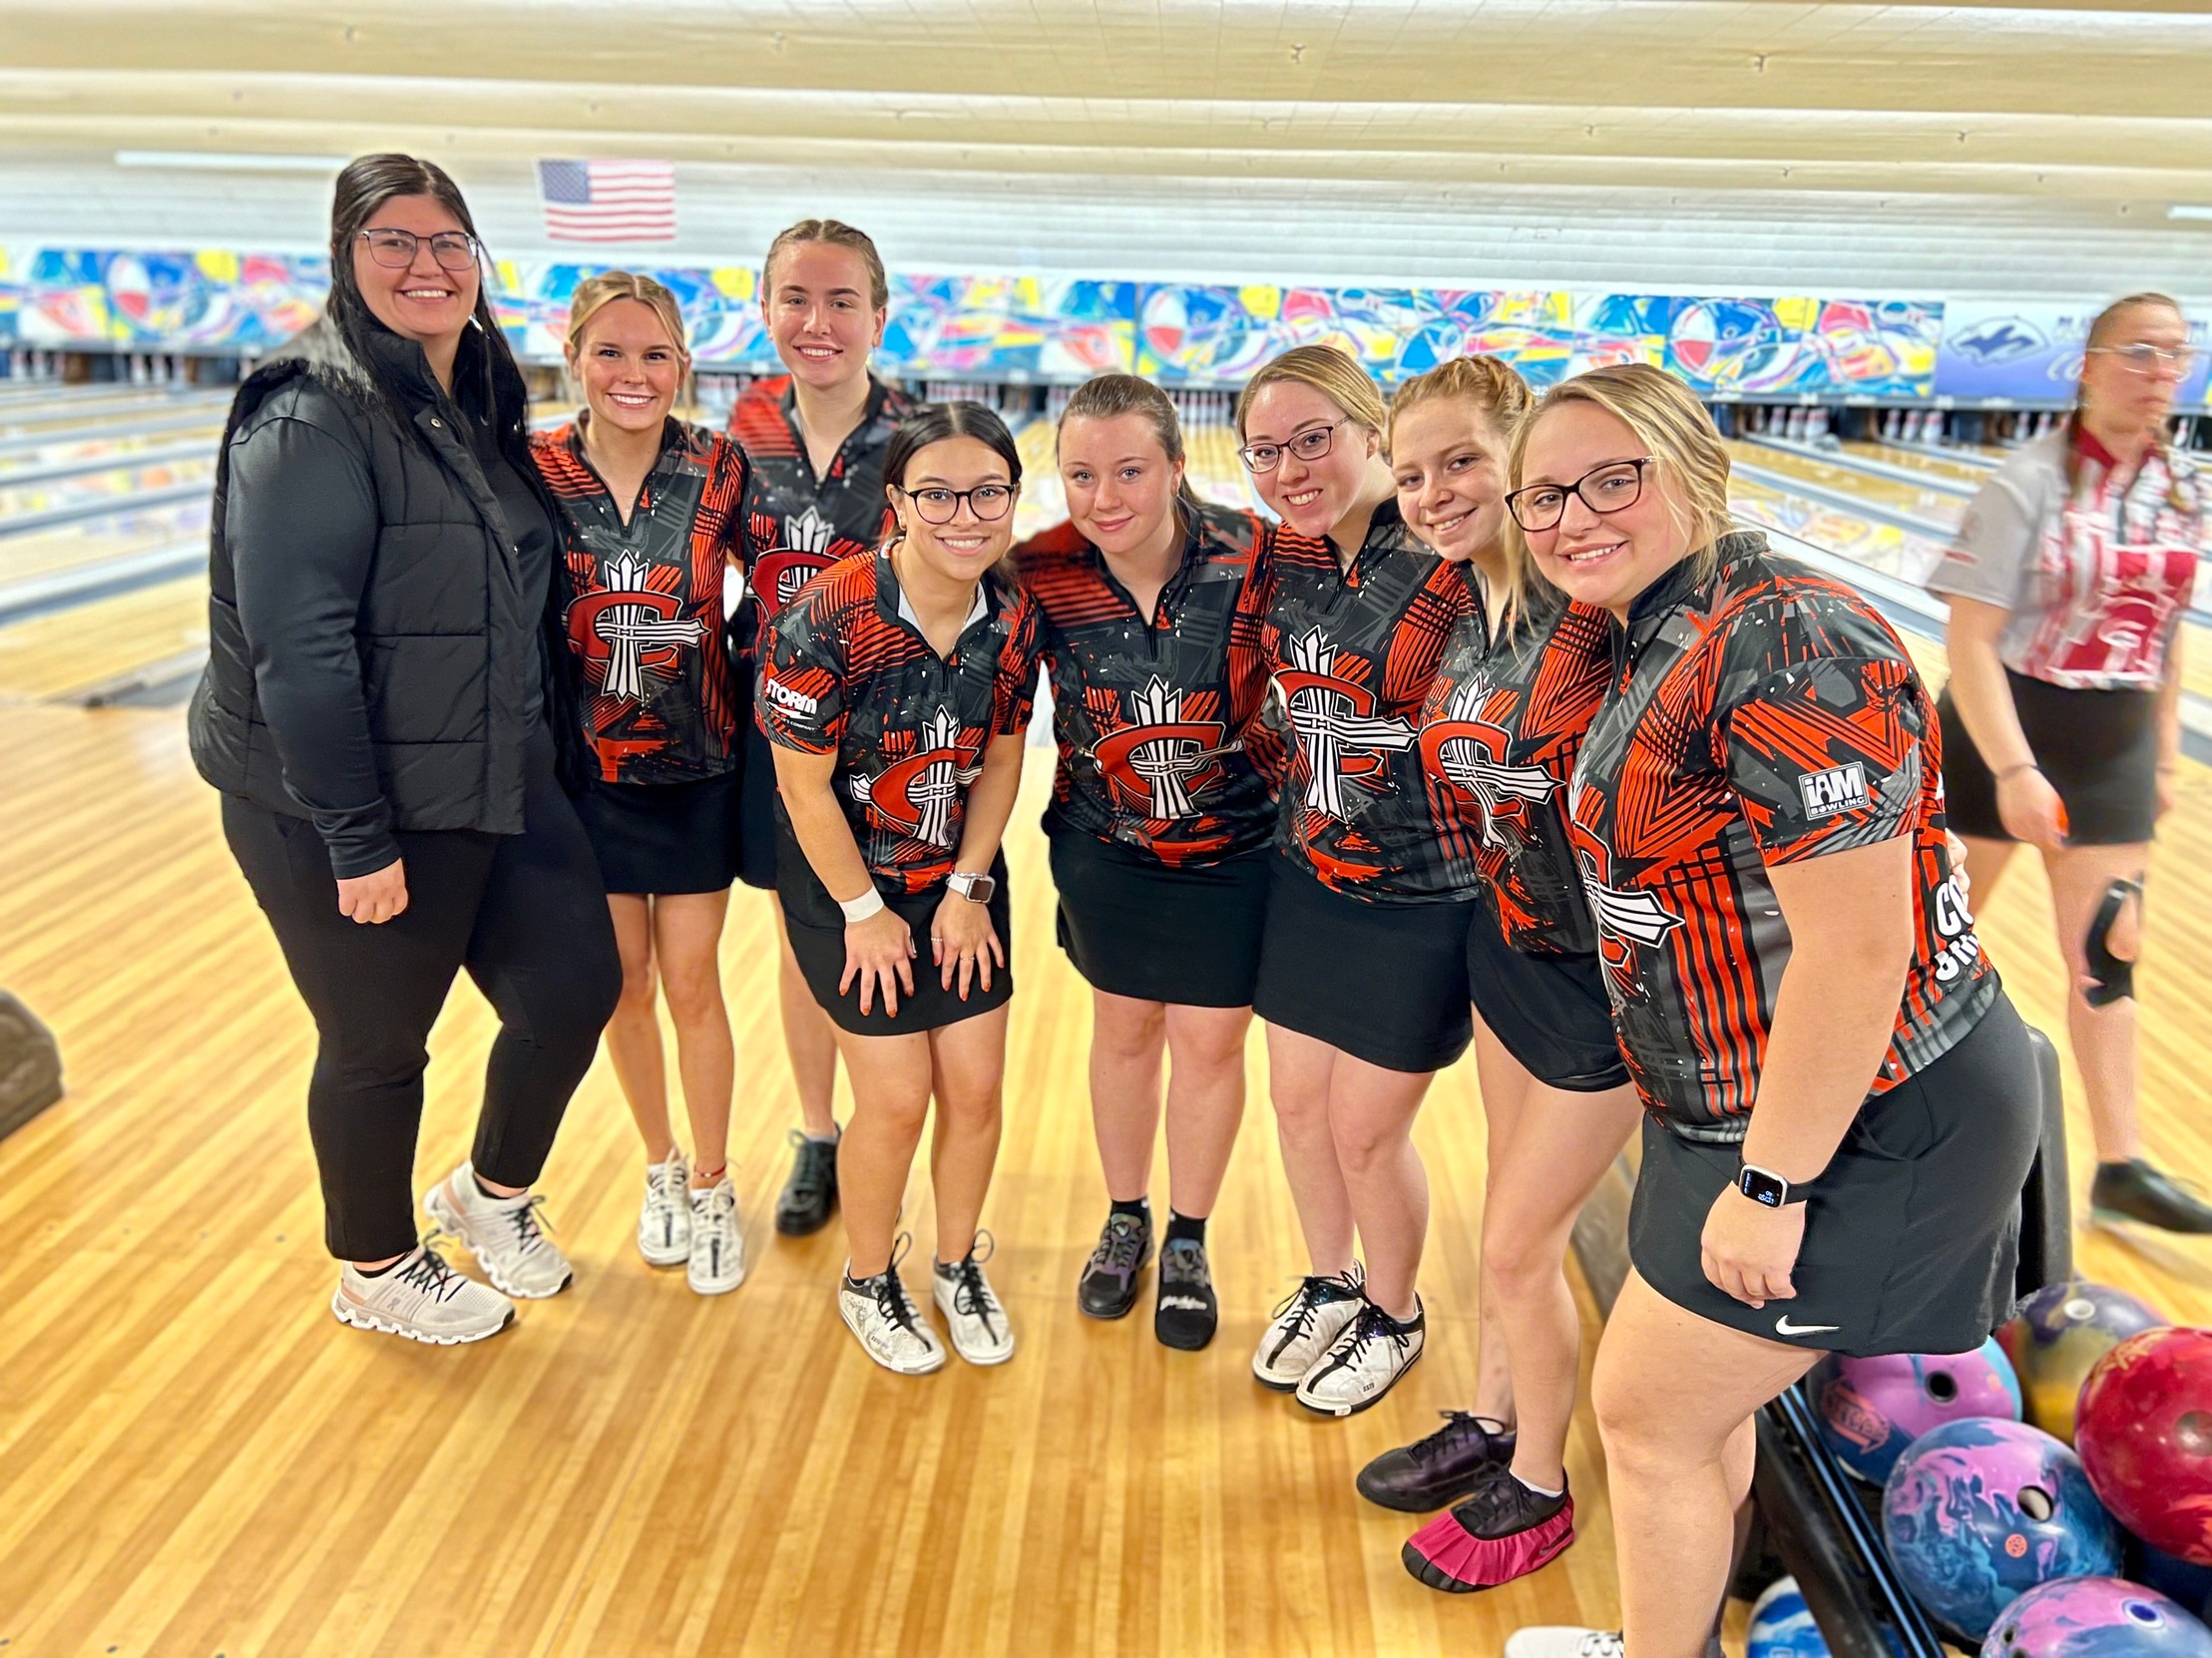 Women's Bowling finishes the NAIA Invitational in 8th place